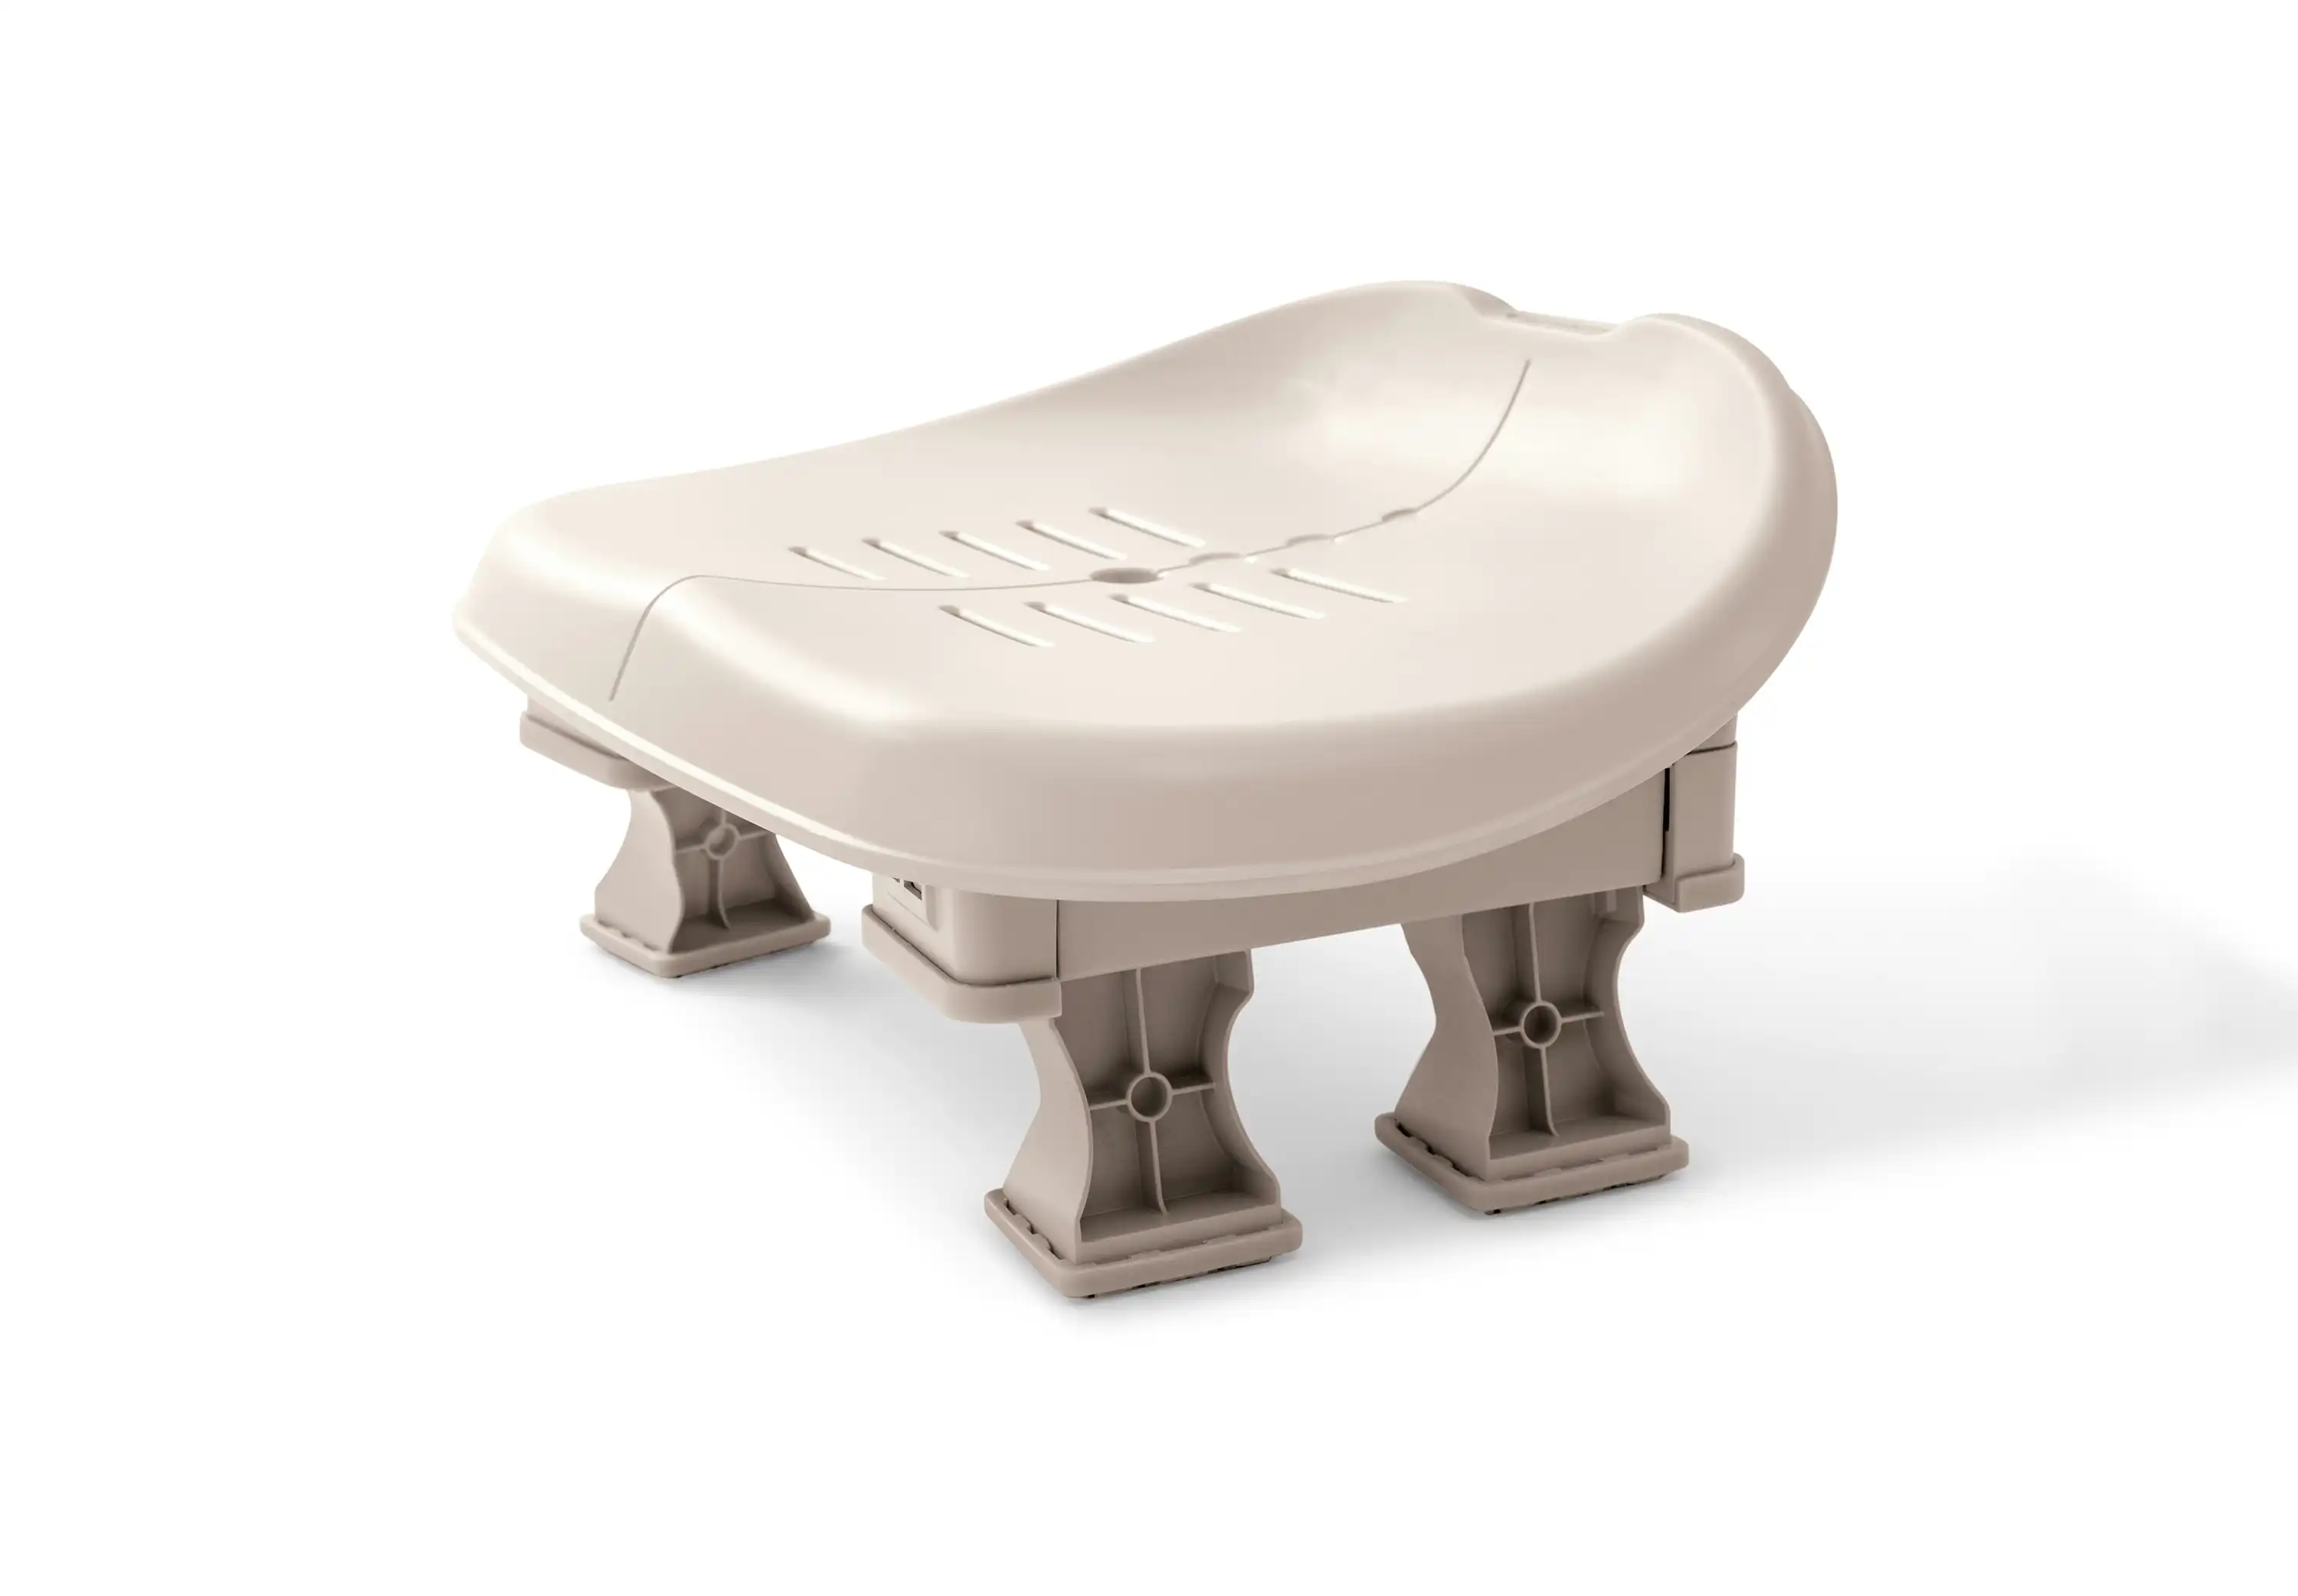 Intex Pure Spa Slip Resistant Removable Seat 28502